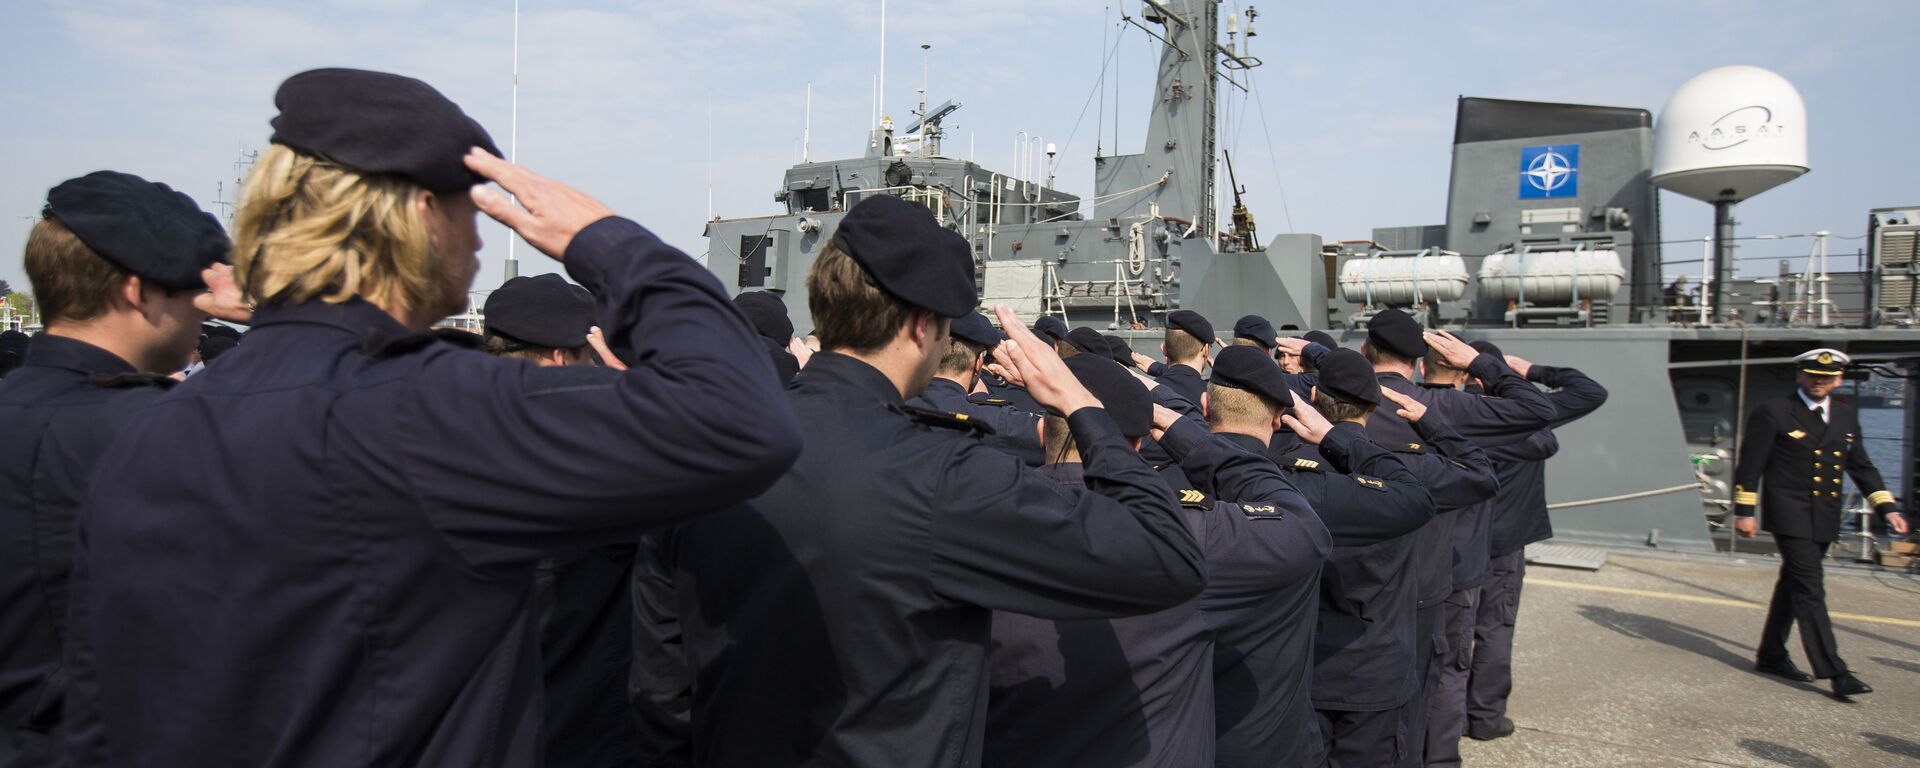 Crew members of Norwegian minesweeper Otra salute after a briefing of NATO Allied Maritime Command Deputy Chief of Staff for Operations, Commodore Arian Minderhoud, right, of the Royal Netherlands Navy before setting sail together in a convoy of five ships of Norway, Belgium, the Netherlands and Estonia from Kiel, Germany, Tuesday, April 22, 2014 - Sputnik International, 1920, 19.08.2020